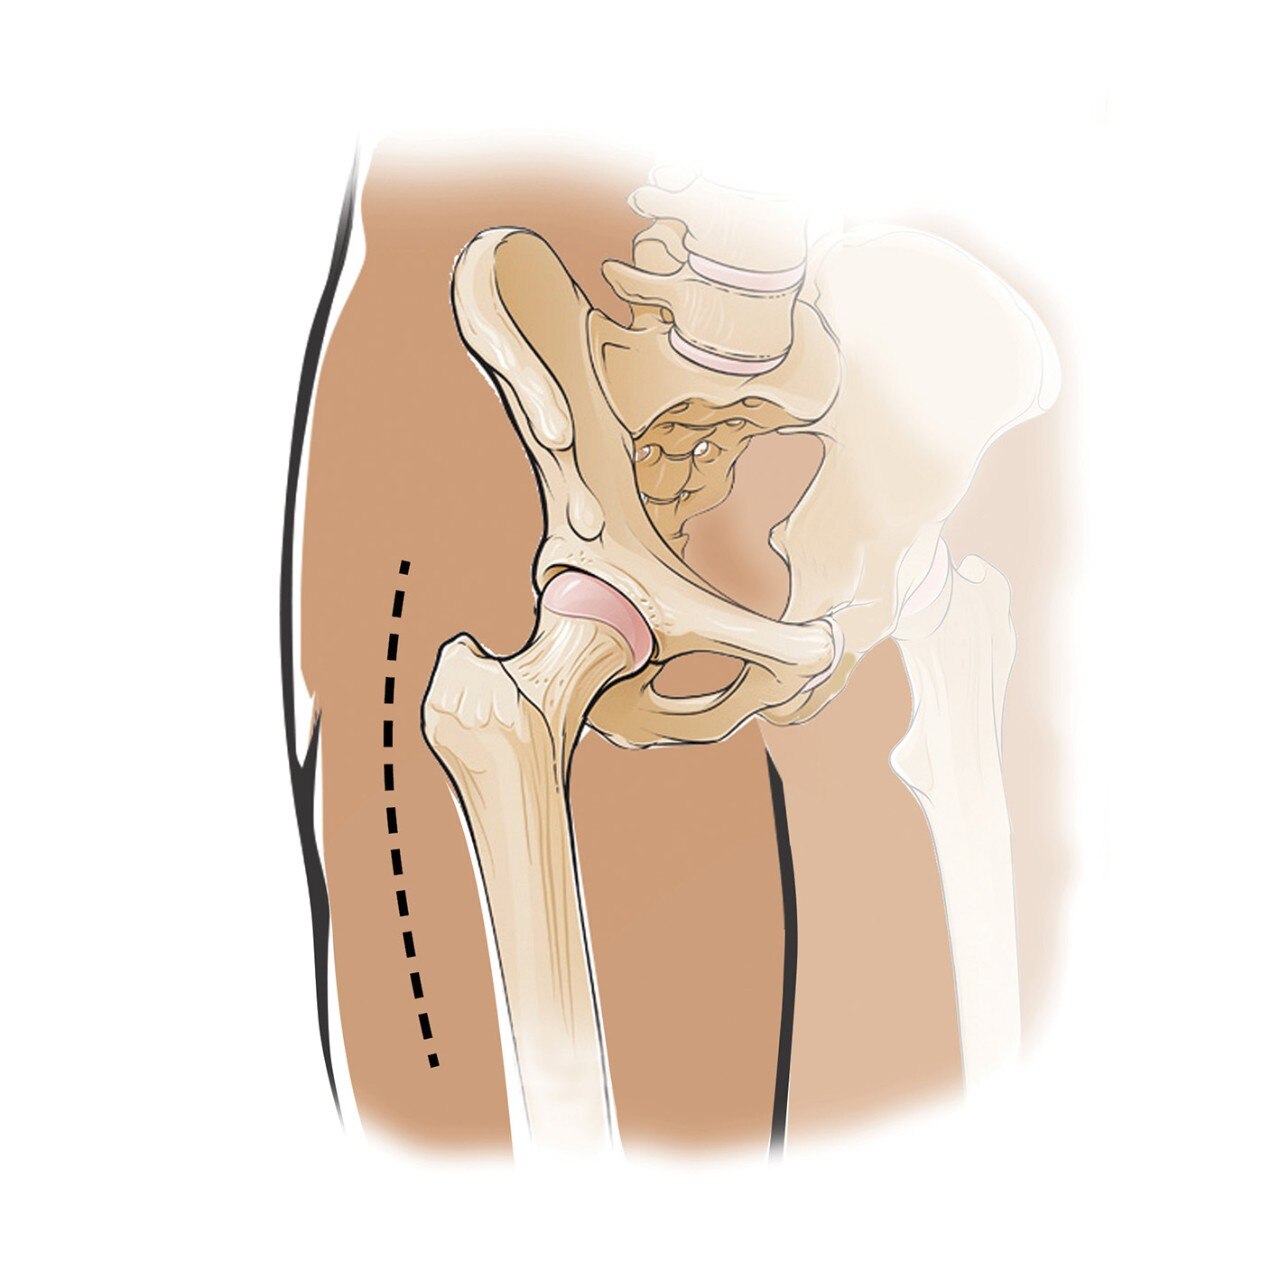 Hip Pain Relief & Surgical Treatment Options